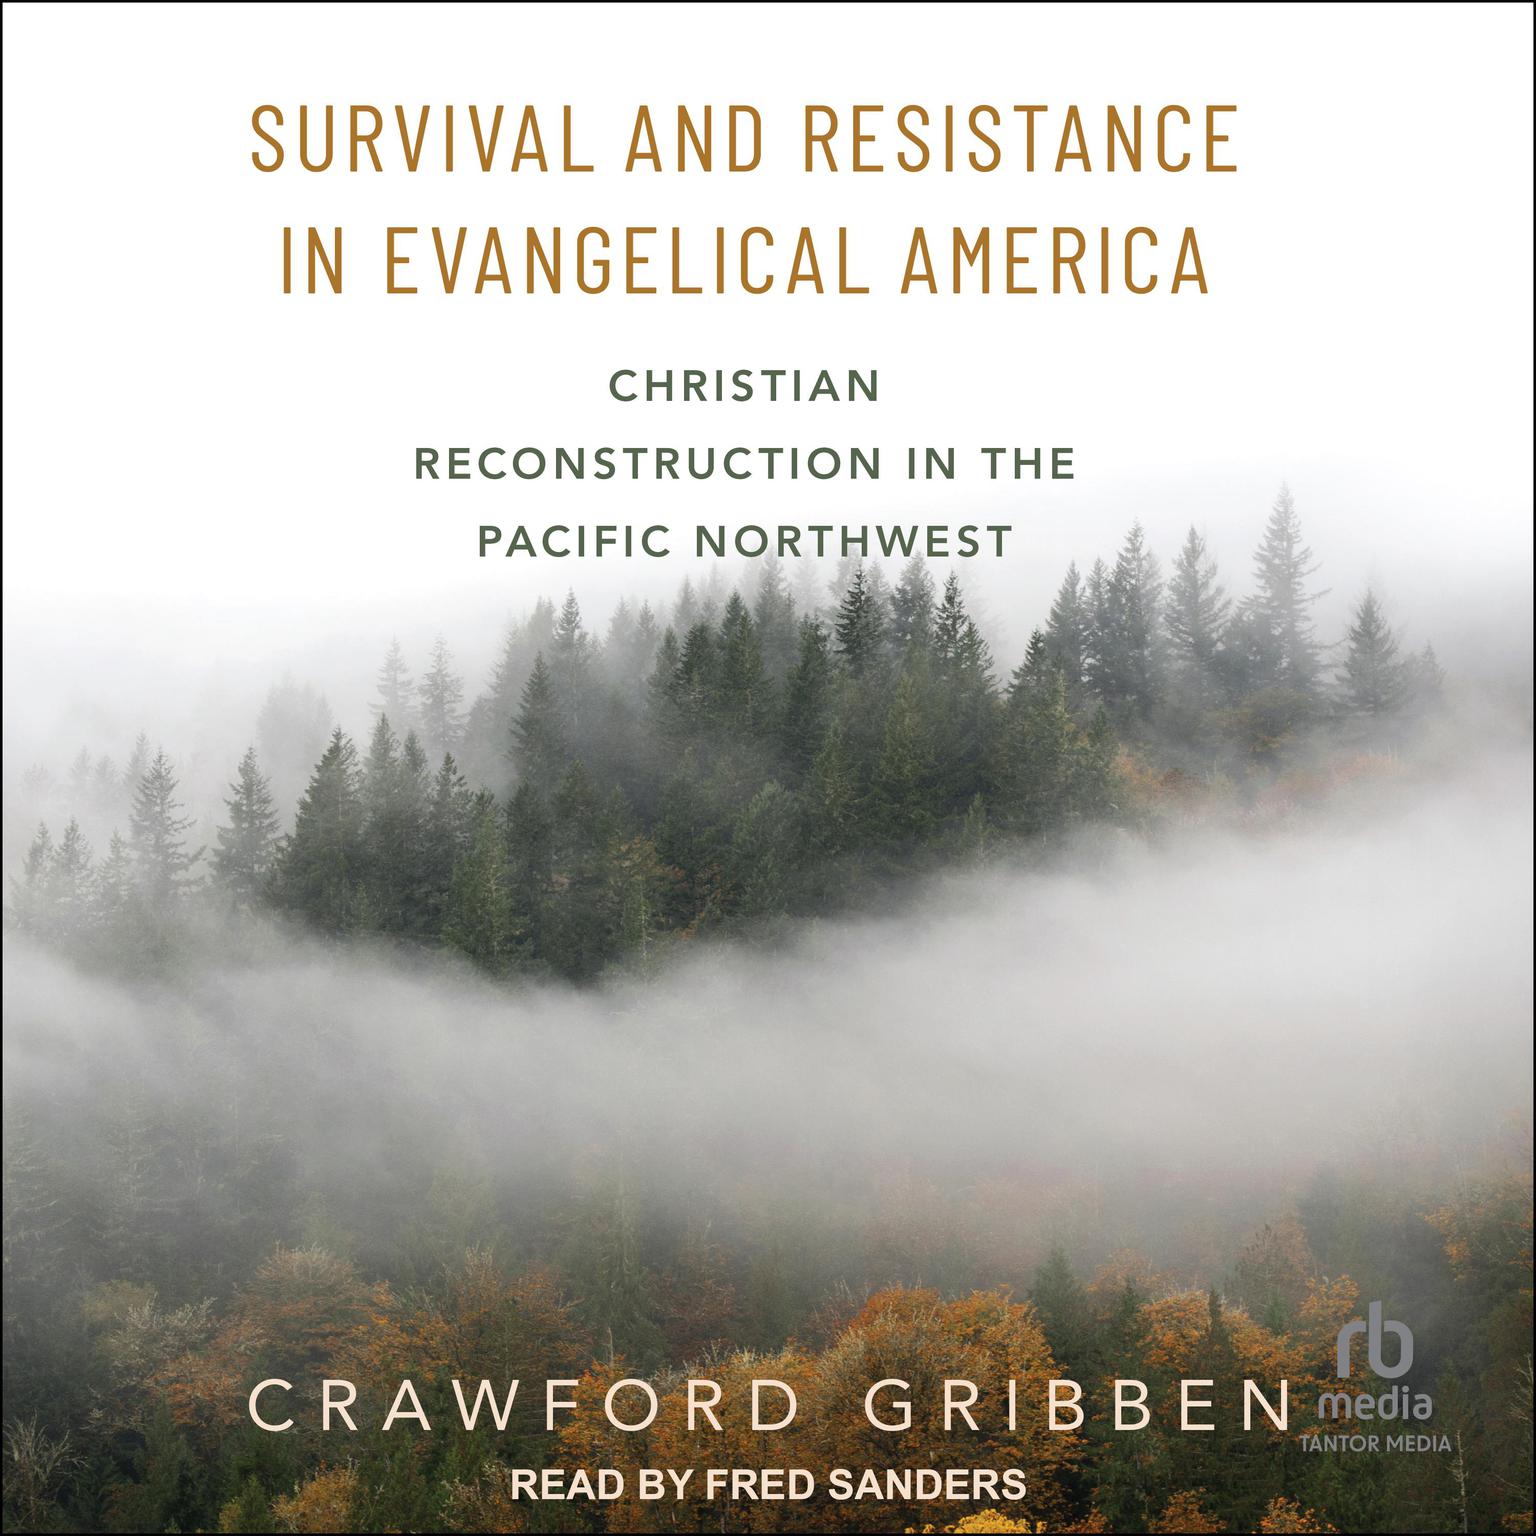 Survival and Resistance in Evangelical America: Christian Reconstruction in the Pacific Northwest Audiobook, by Crawford Gribben